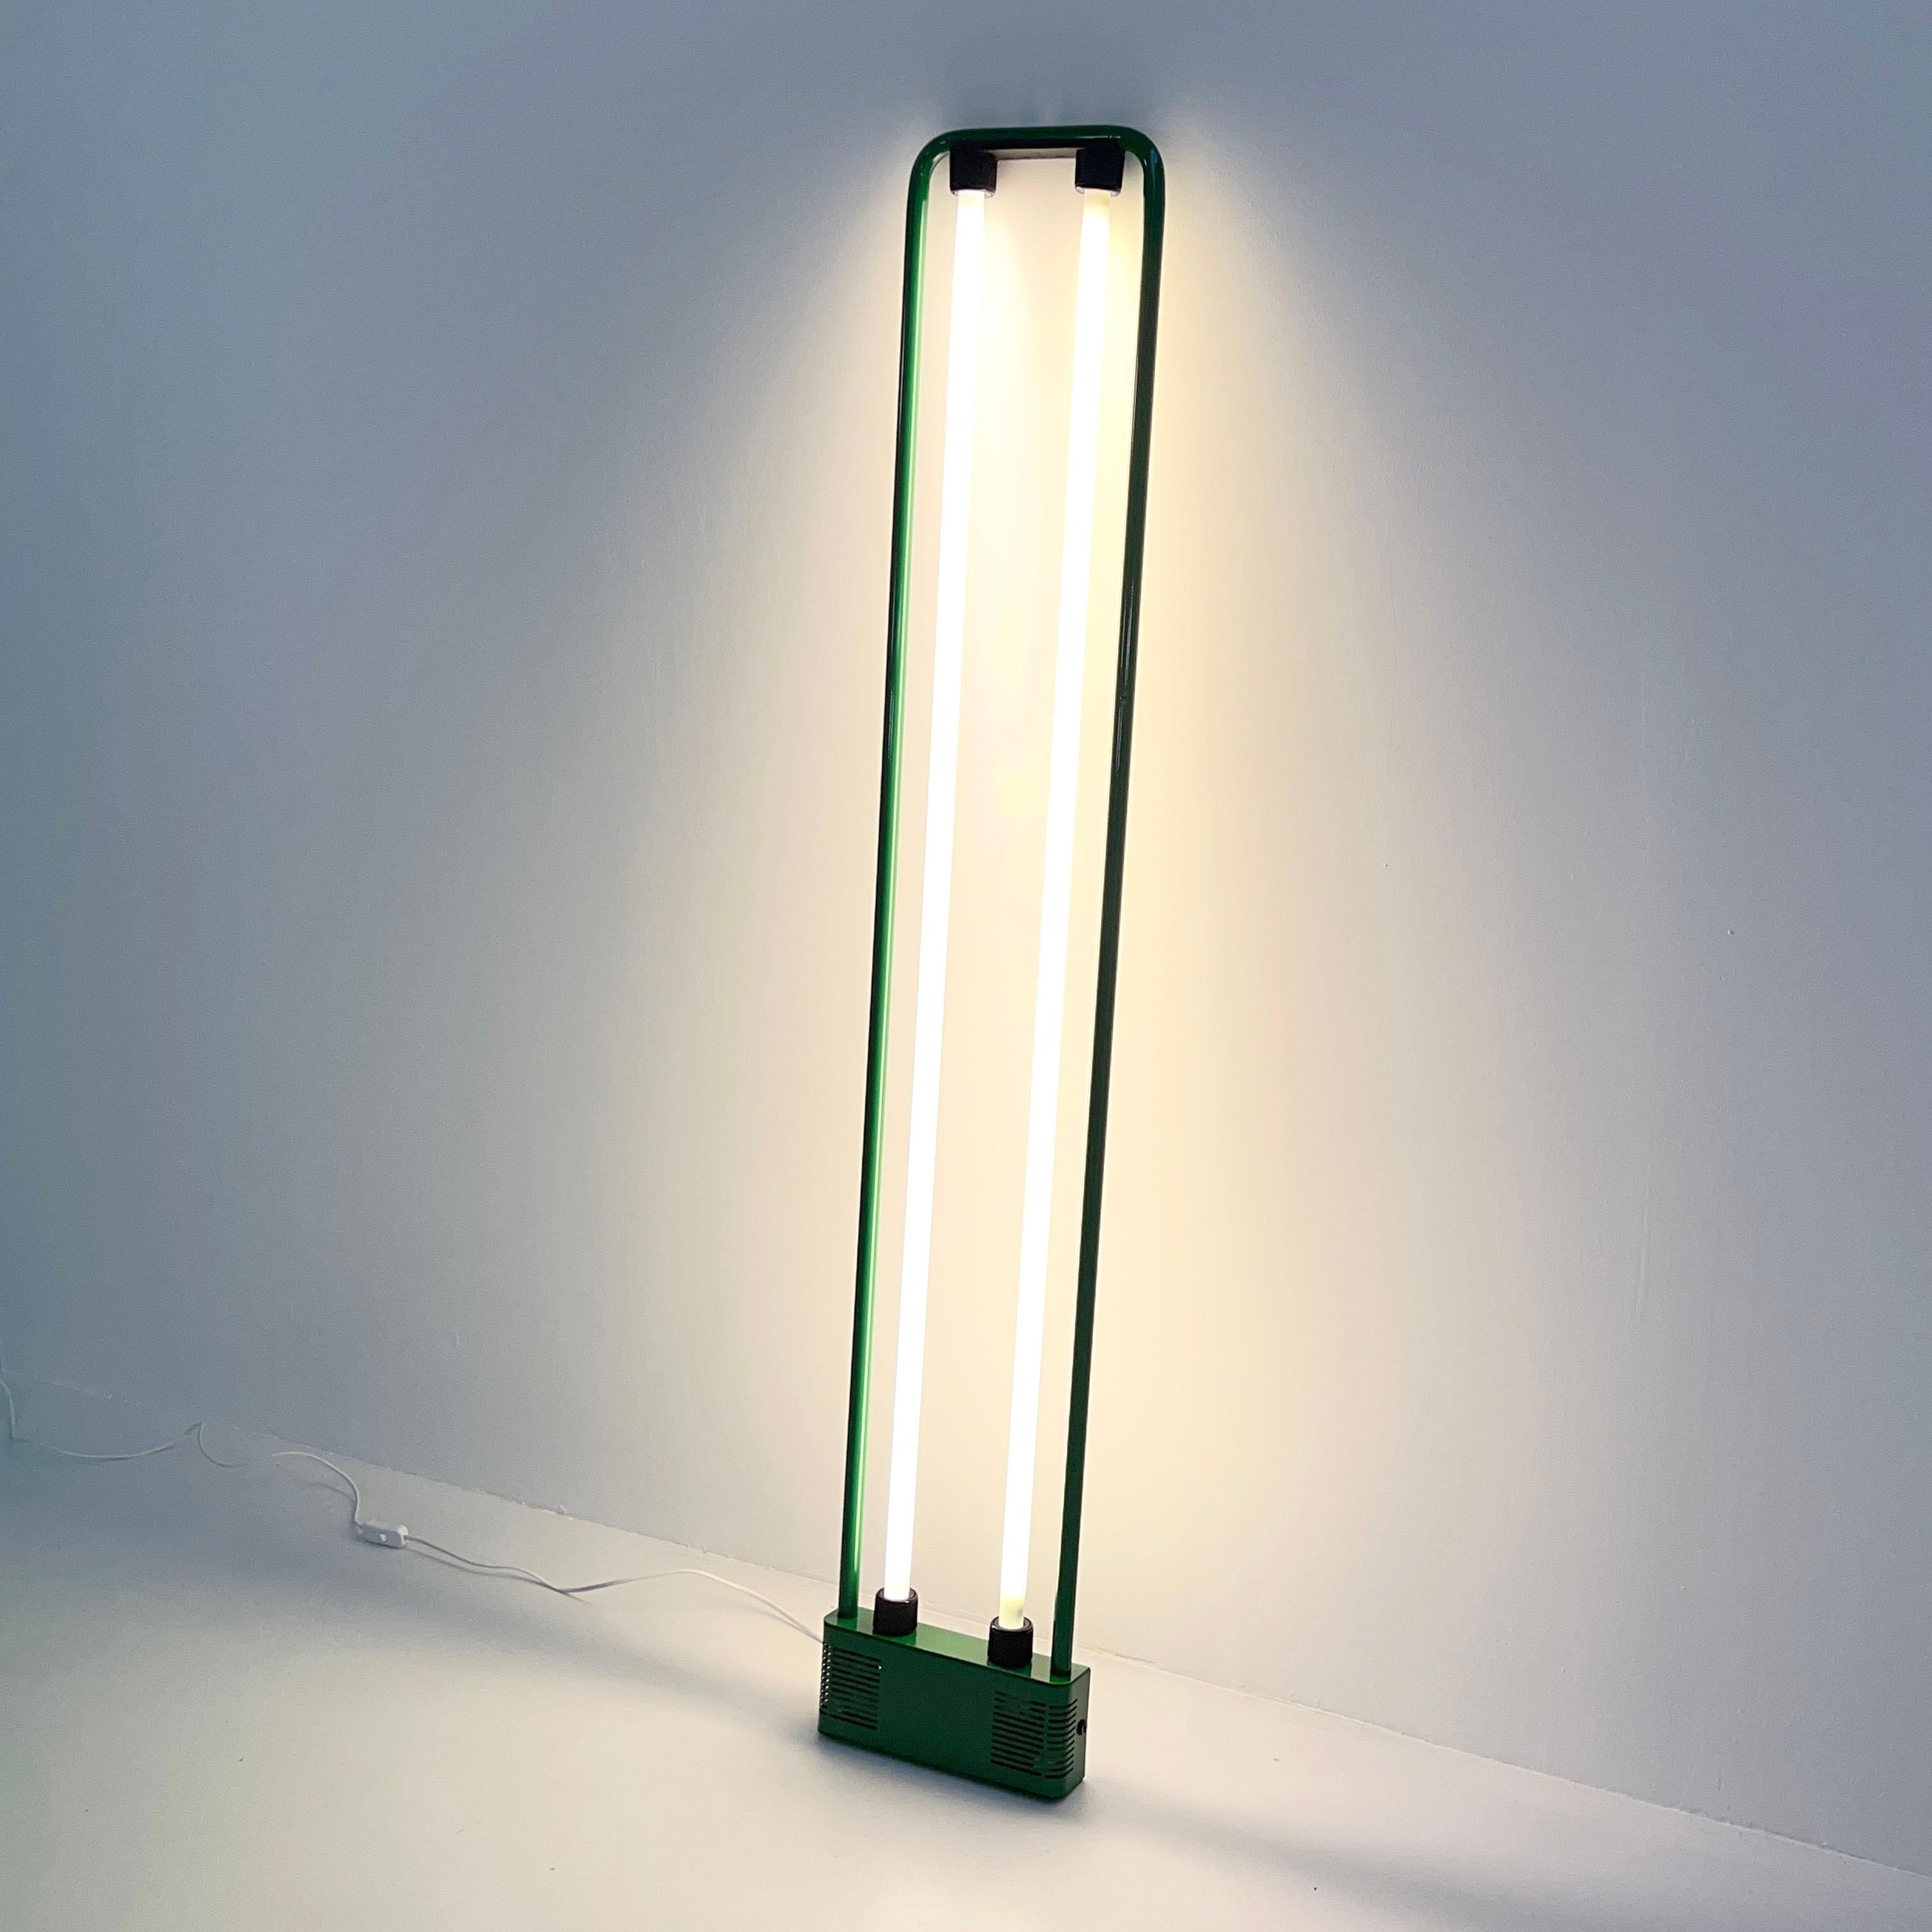 Green Neon Lamp by Gian N. Gigante for Zerbetto, 1980s
3 pieces available - Price is per piece
Designer - Gian N. Gigante
Producer - Zerbetto
Design Period - Eighties
Measurements - width 30 cm x depth 6 cm x height 170 cm
Materials - Metal